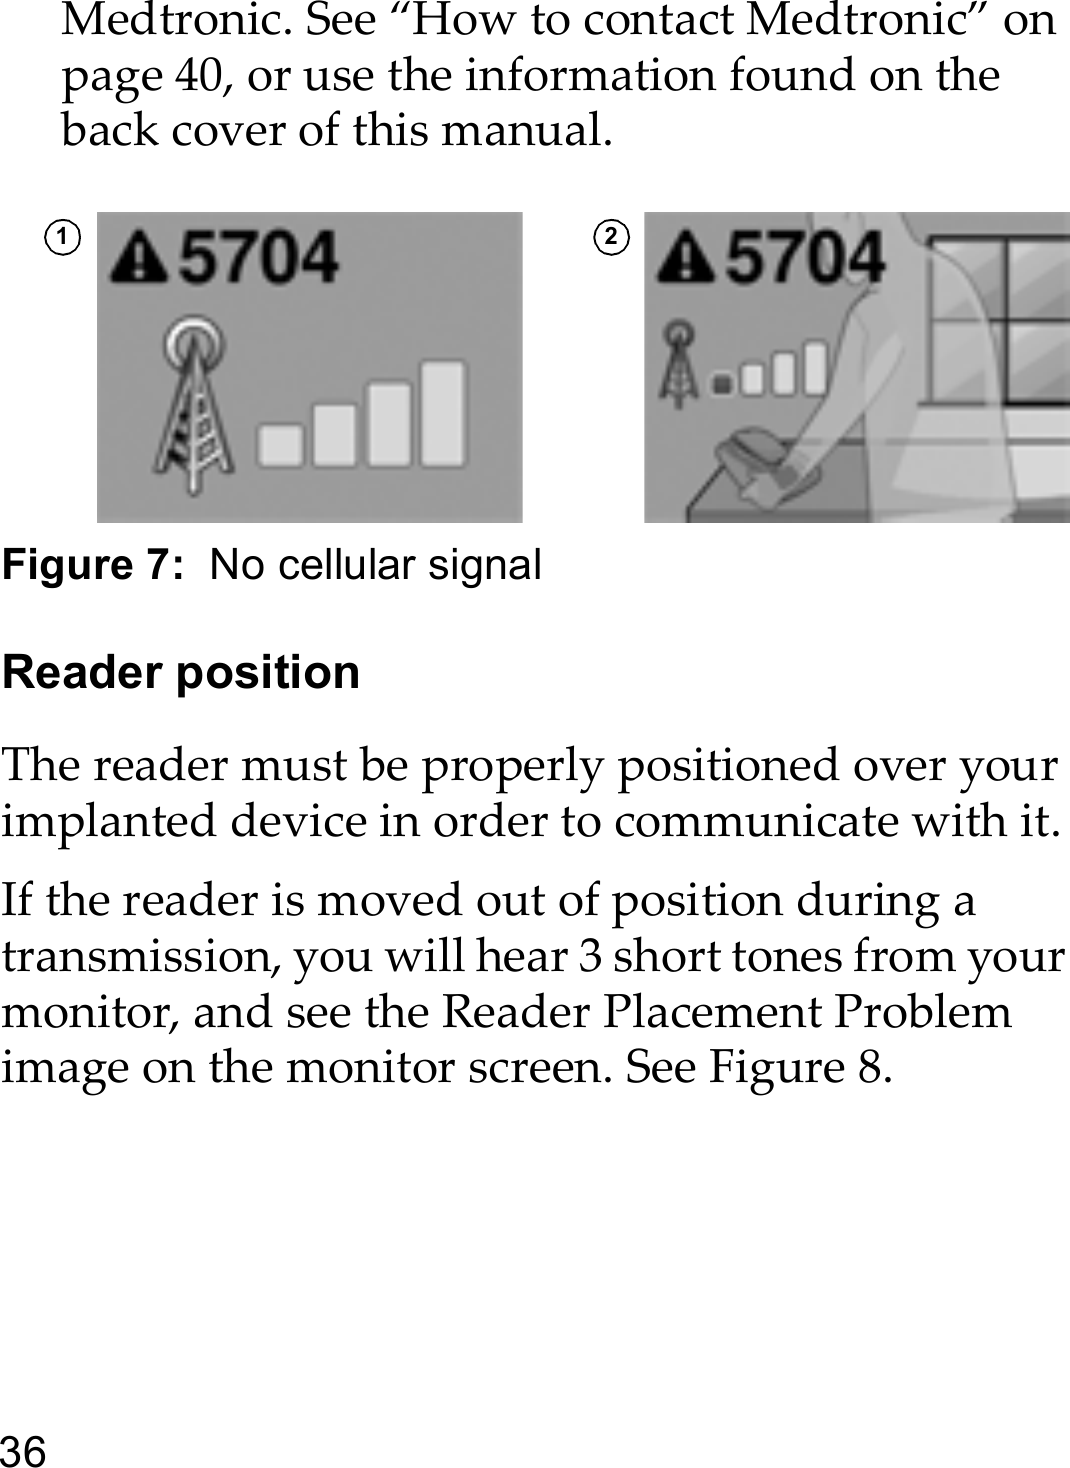 36Medtronic. See “How to contact Medtronic” on page 40, or use the information found on the back cover of this manual. Figure 7:  No cellular signalReader positionThe reader must be properly positioned over your implanted device in order to communicate with it.If the reader is moved out of position during a transmission, you will hear 3 short tones from your monitor, and see the Reader Placement Problem image on the monitor screen. See Figure 8.1 2